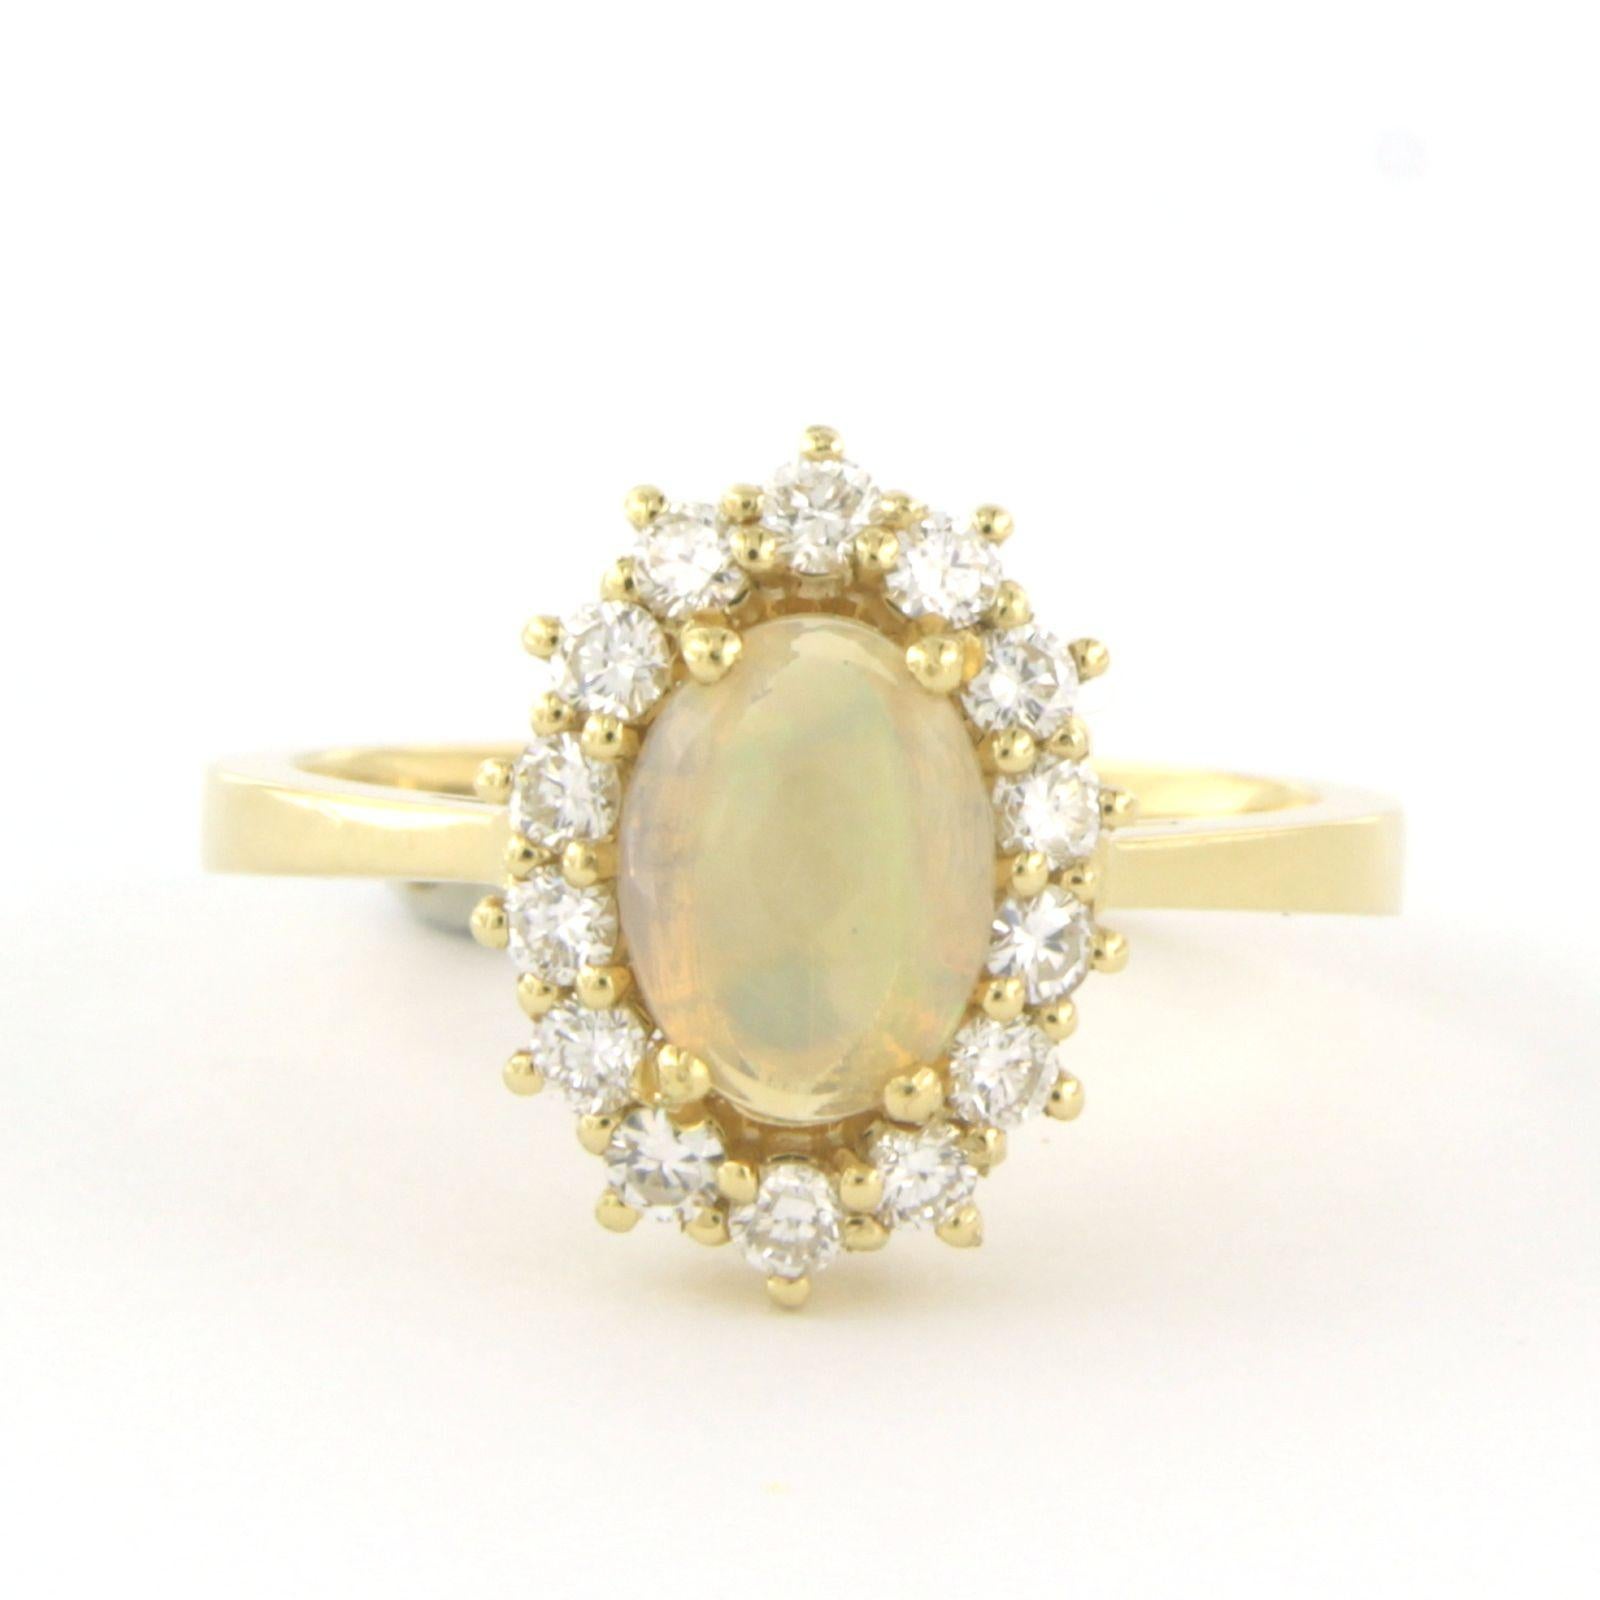 18 kt yellow gold ring set with opal and brilliant cut diamonds, 0.46 ct in total - G/H - VS/SI - ring size U.S. 7.25 - EU. 17.5(55)

Detailed description

the top of the ring is 1.4 cm wide and 6.6 mm high

Ring size US 7.25 - EU. 17.5(55), ring